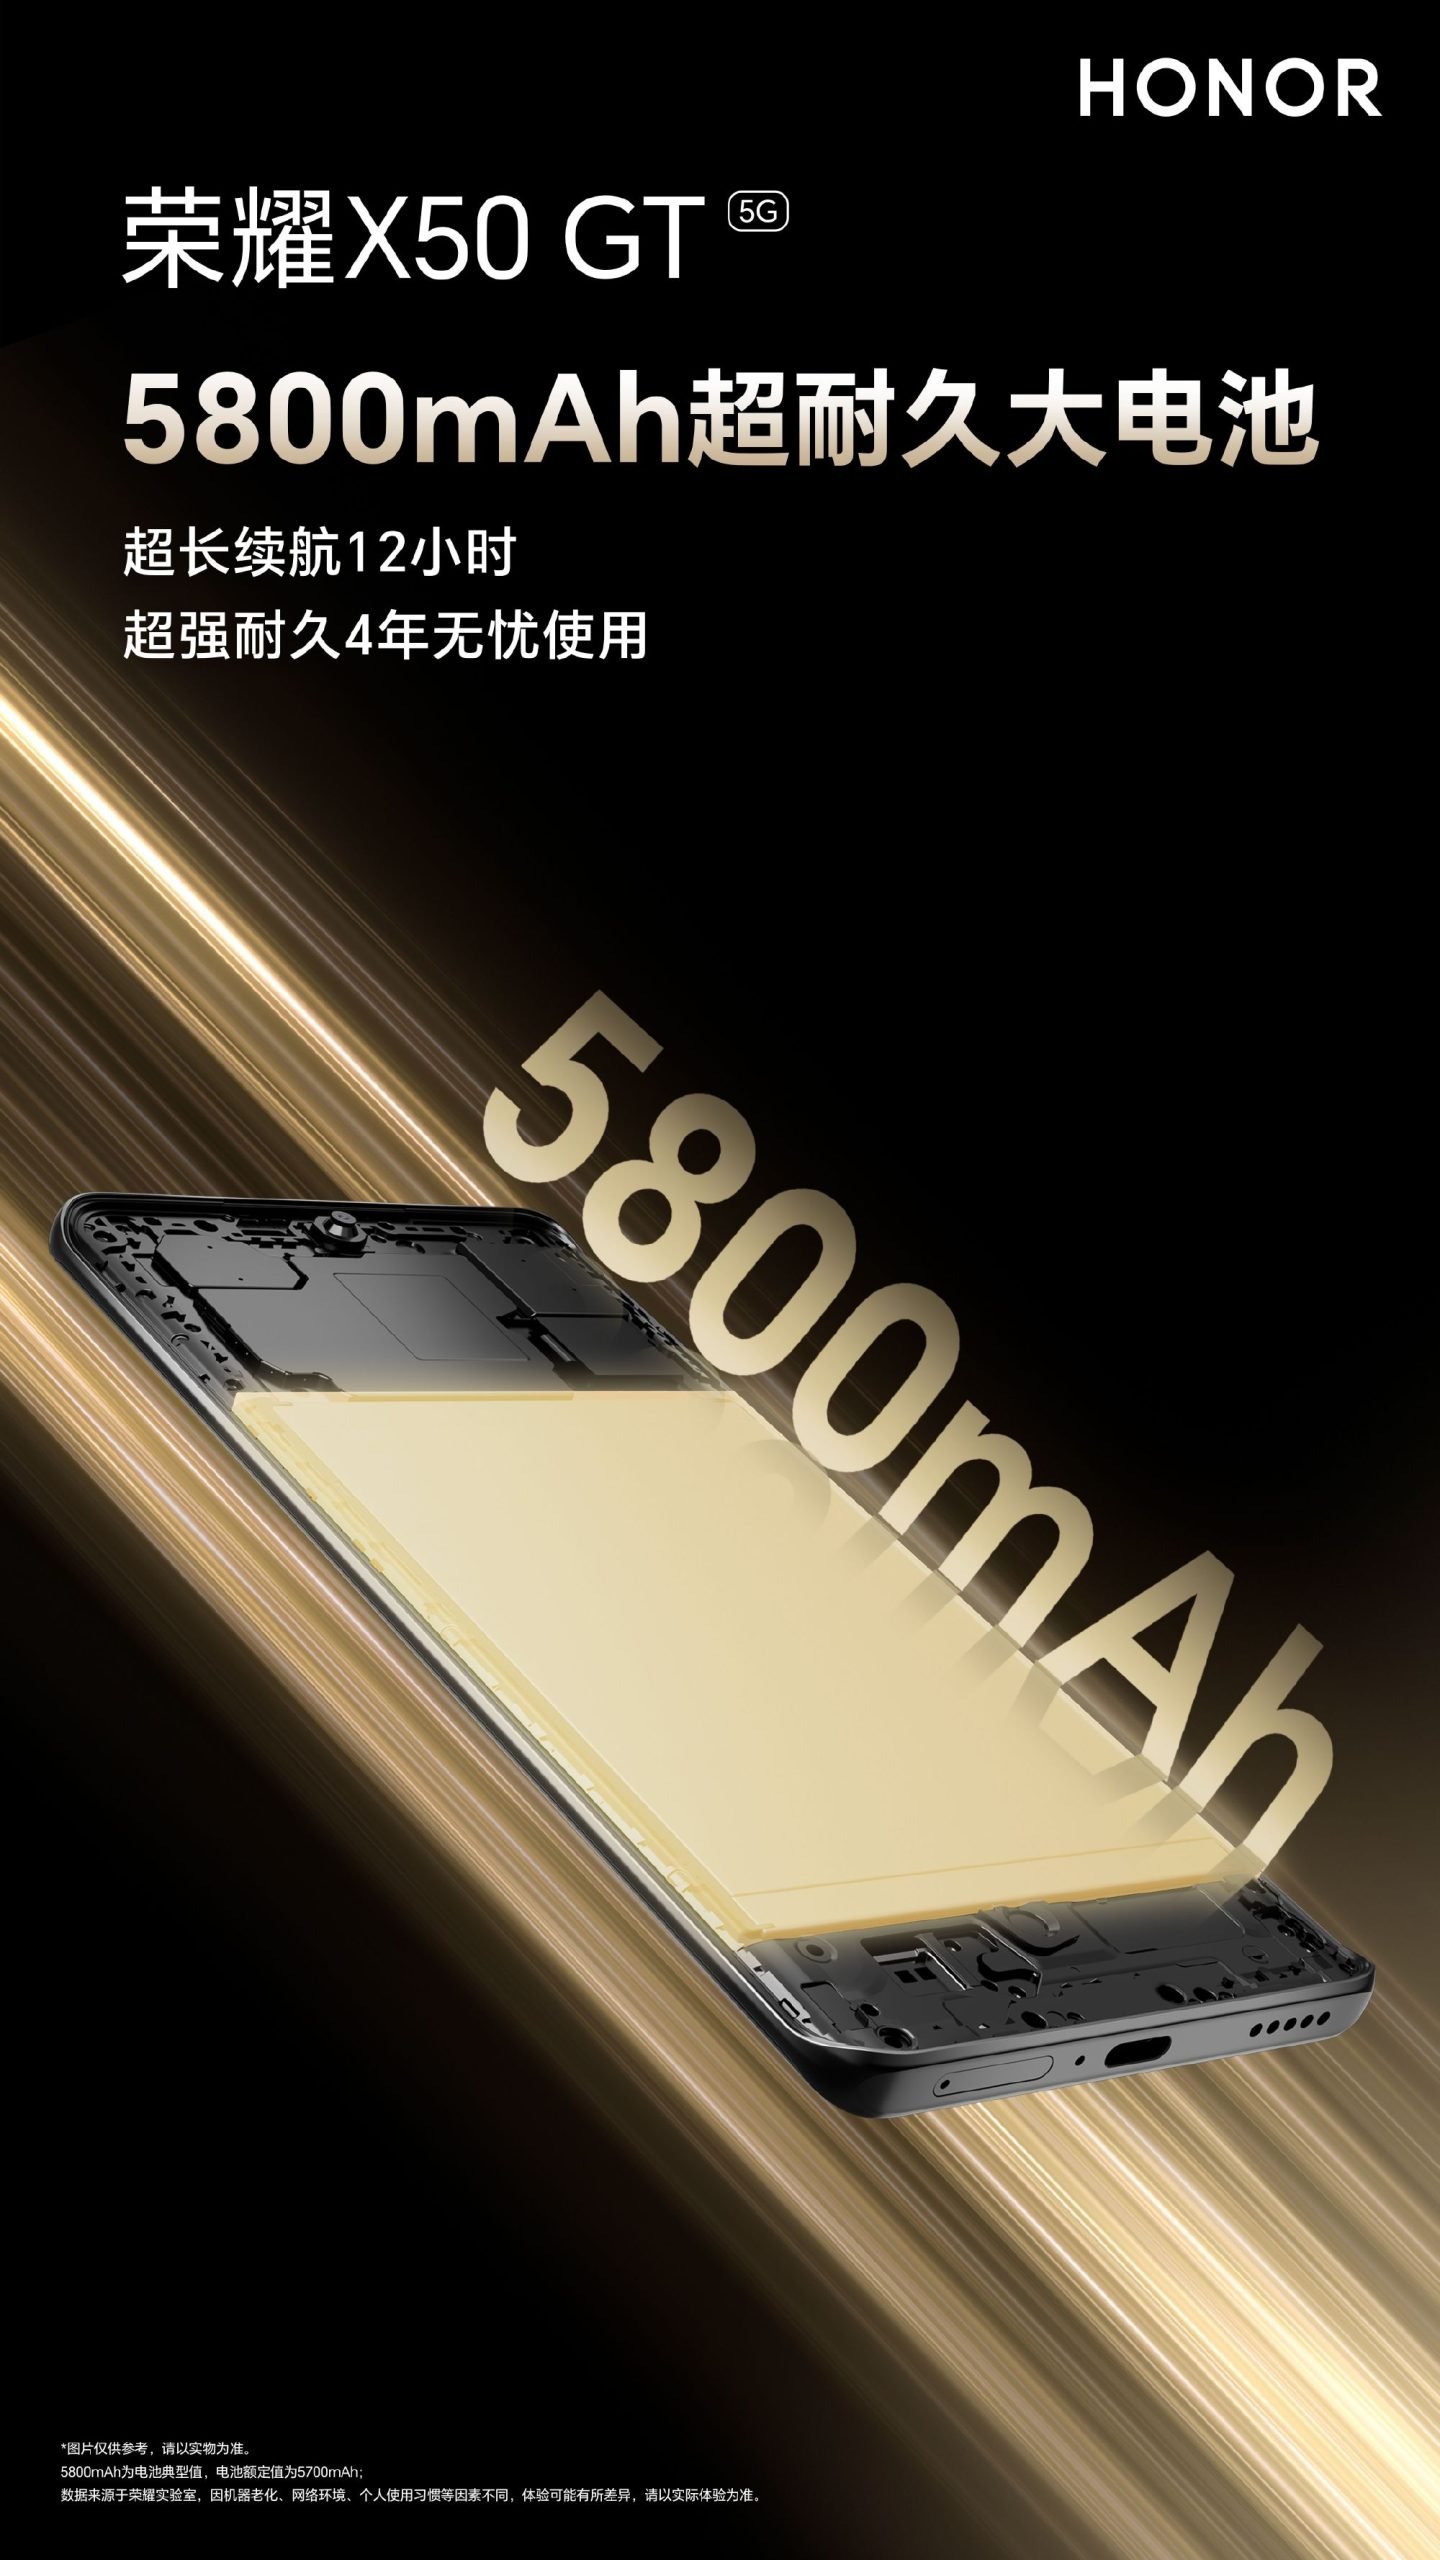 Honor X50 GT battery